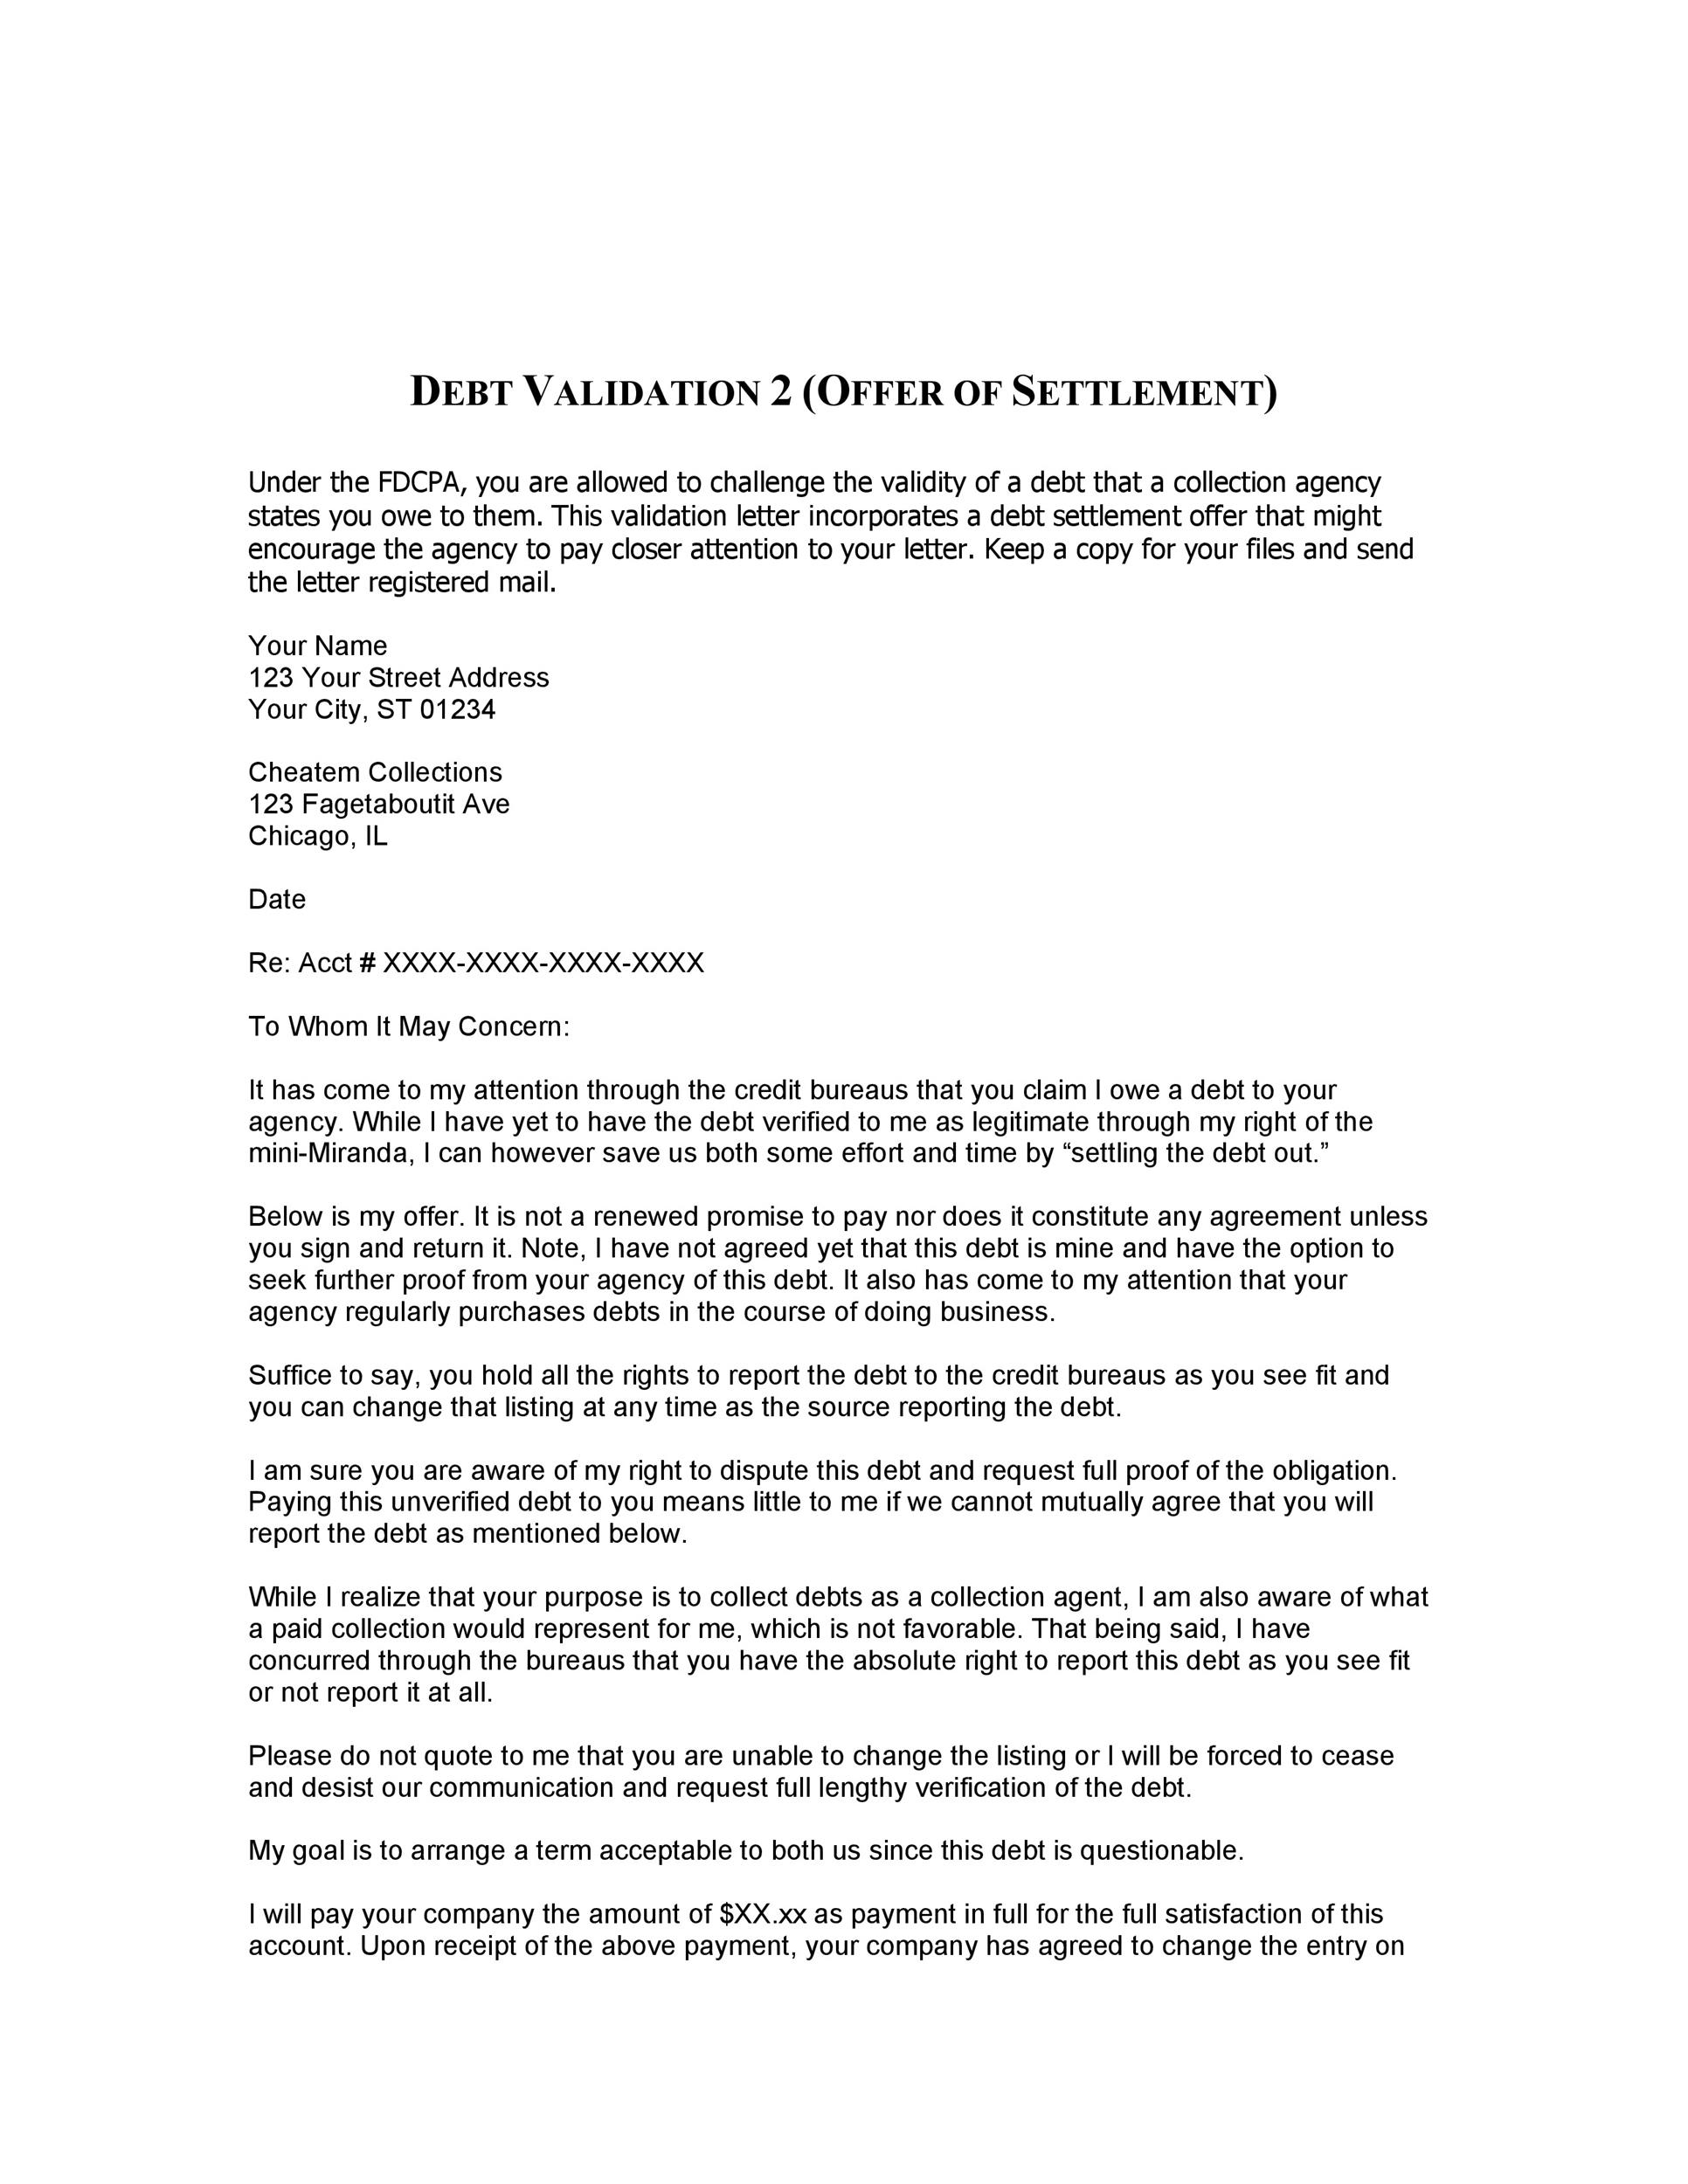 Letter To Creditor To Verify Debt from templatelab.com